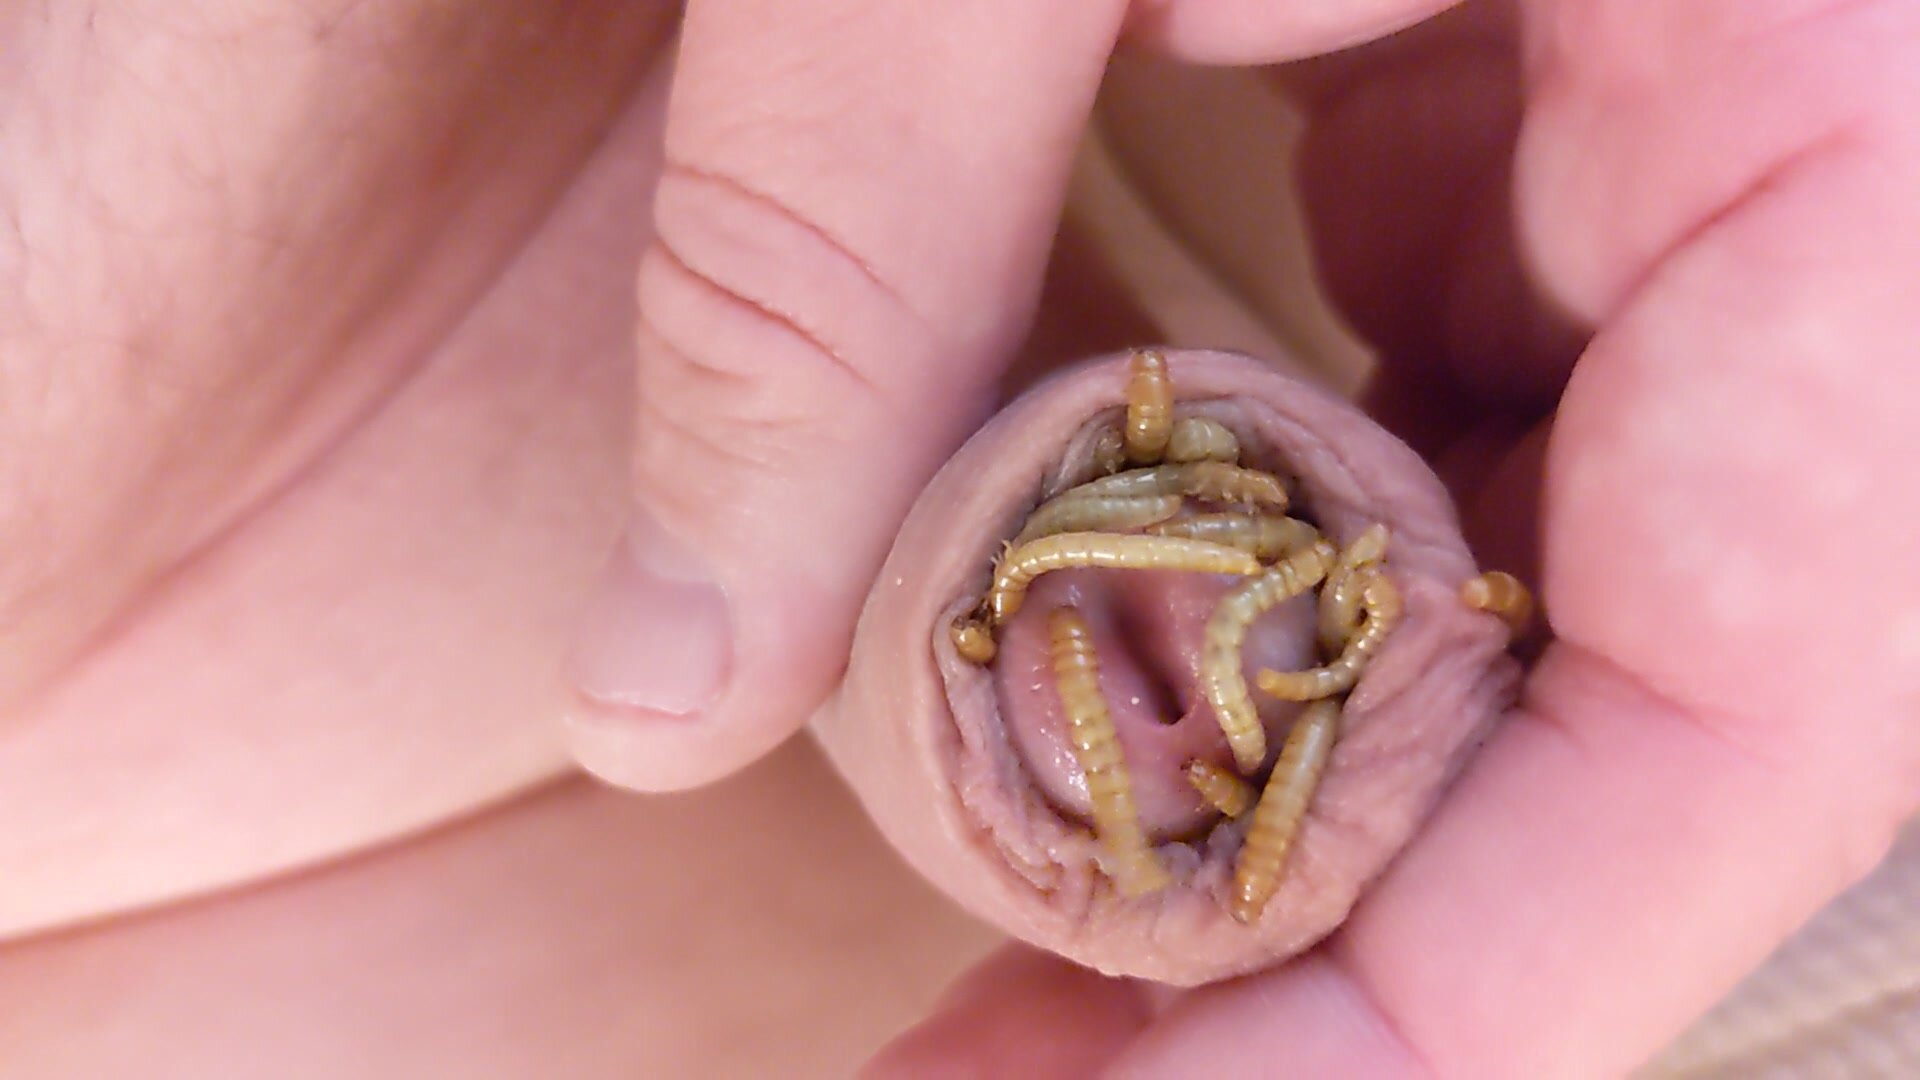 Worms in foreskin